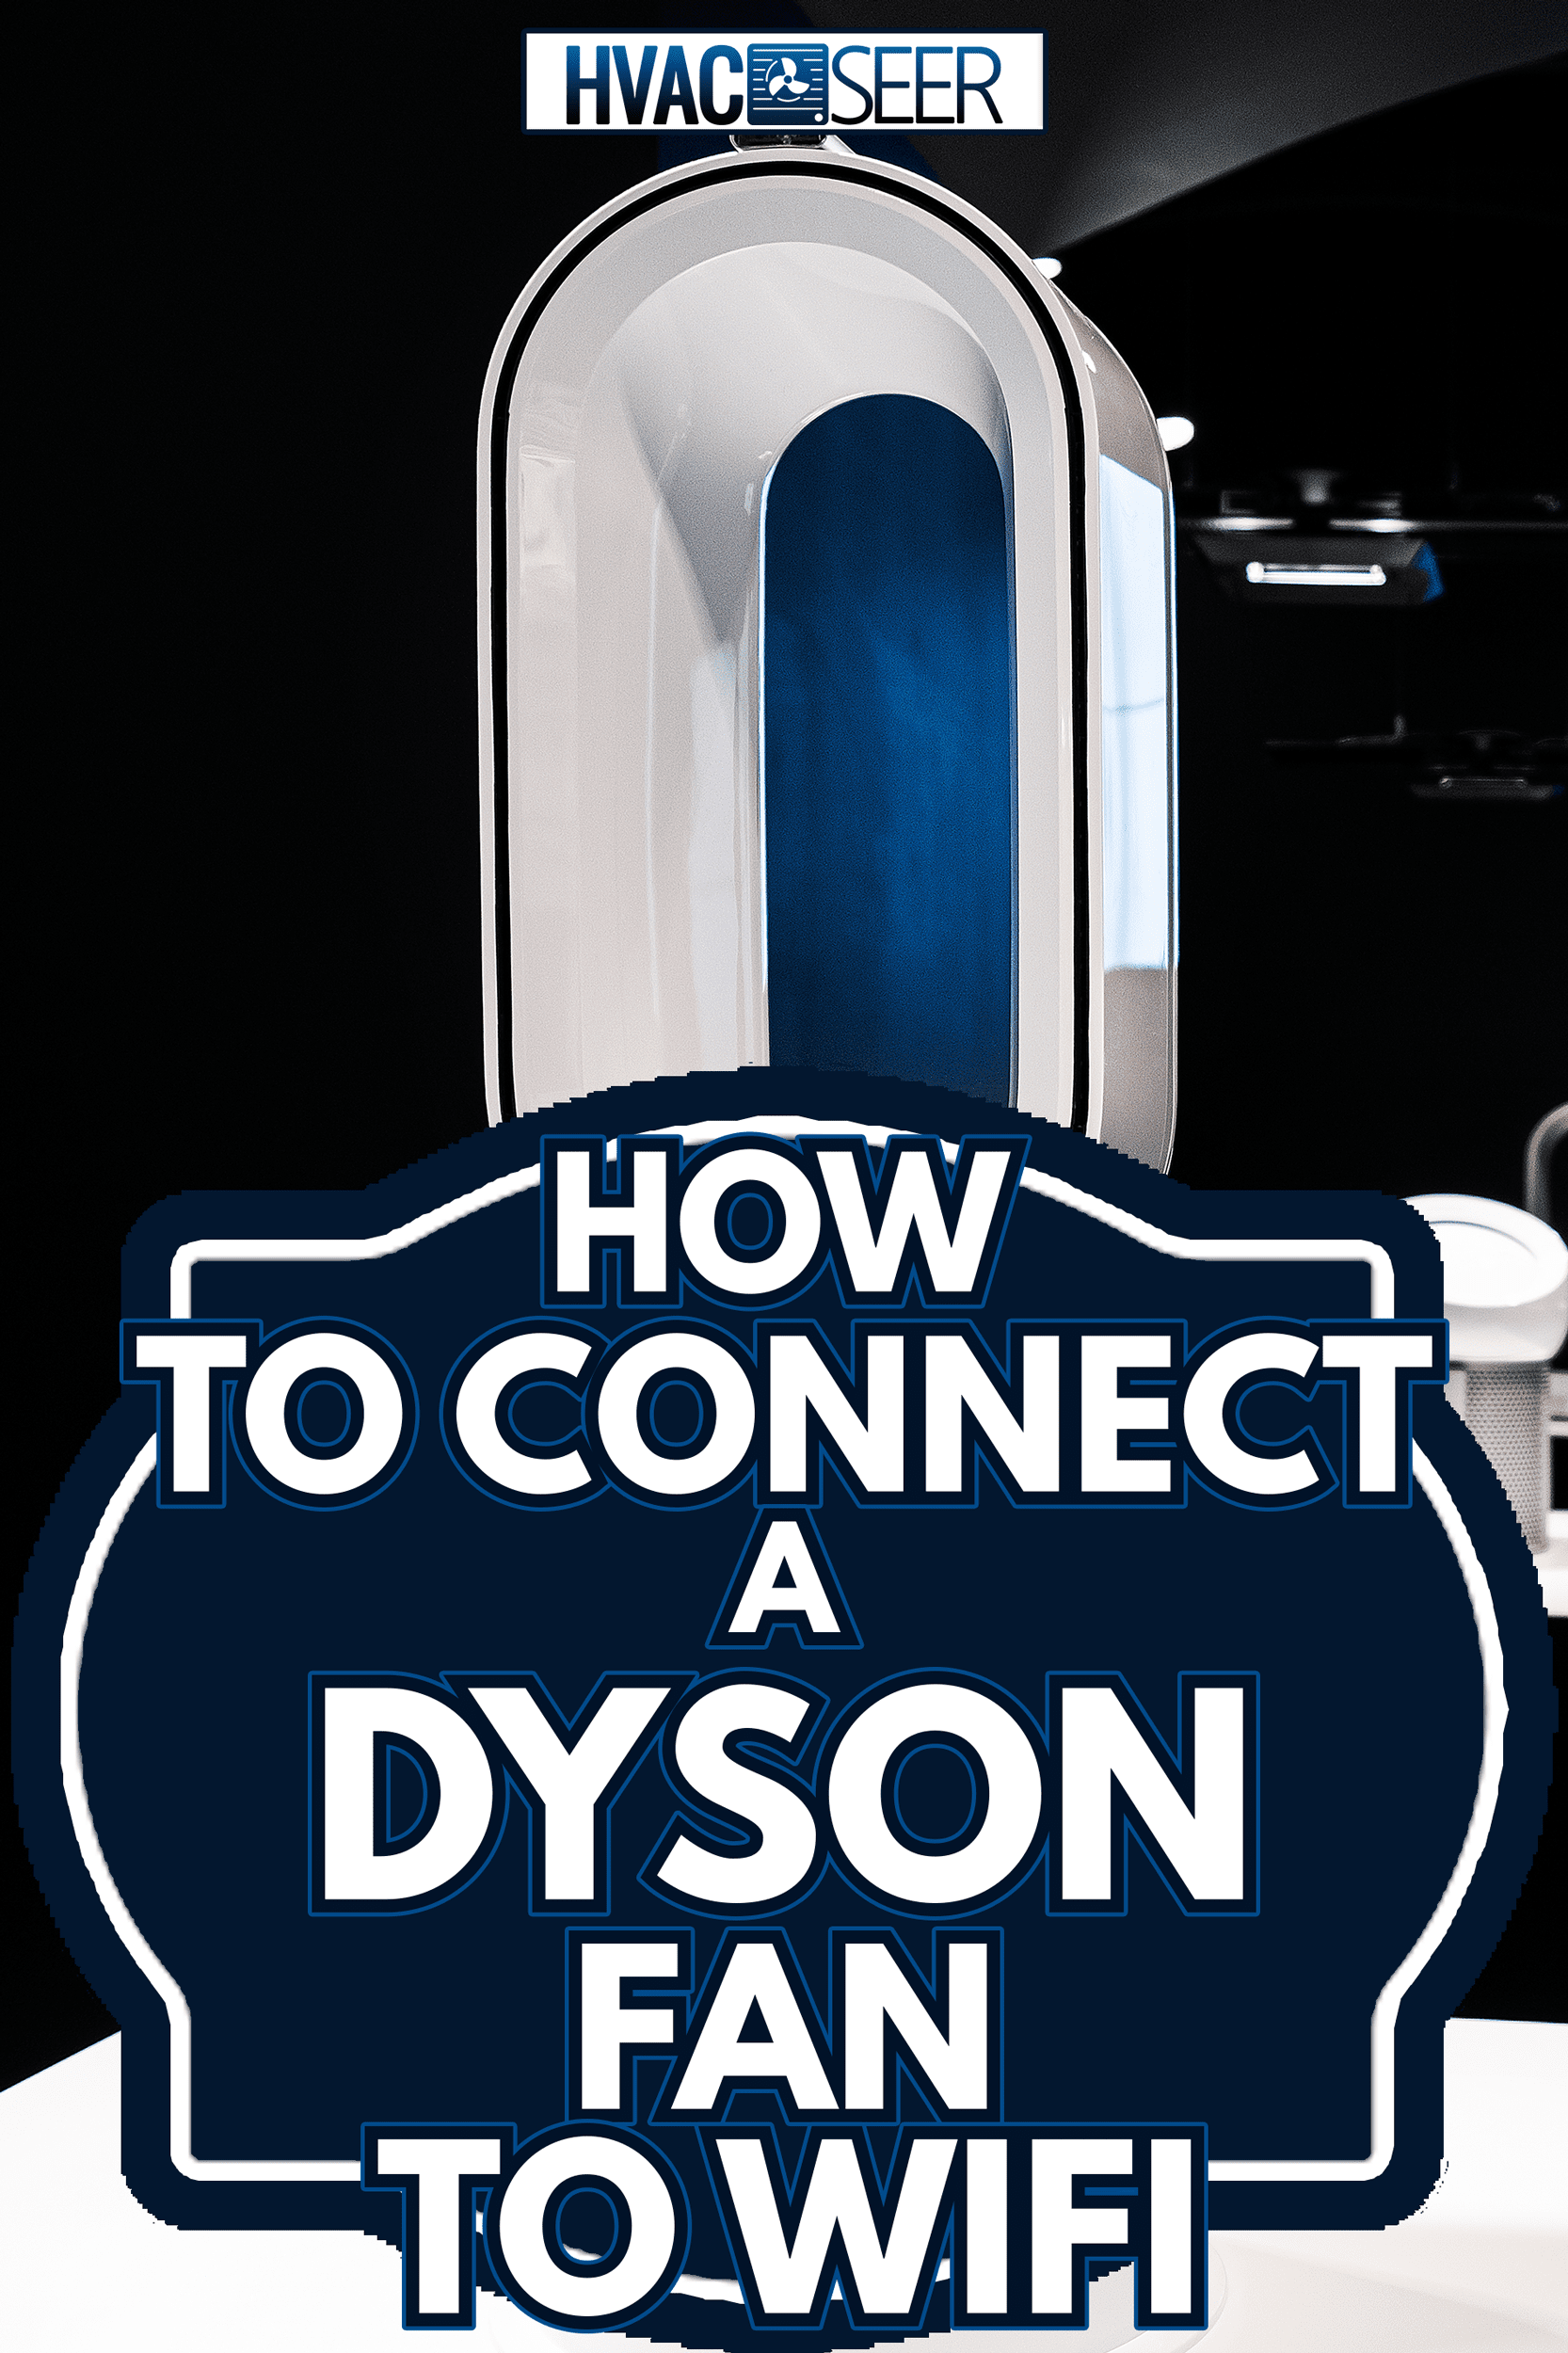 Showroom Brand Store Dyson. Modern Home Appliances And Beauty Tools Dyson - How To Connect A Dyson Fan To Wifi